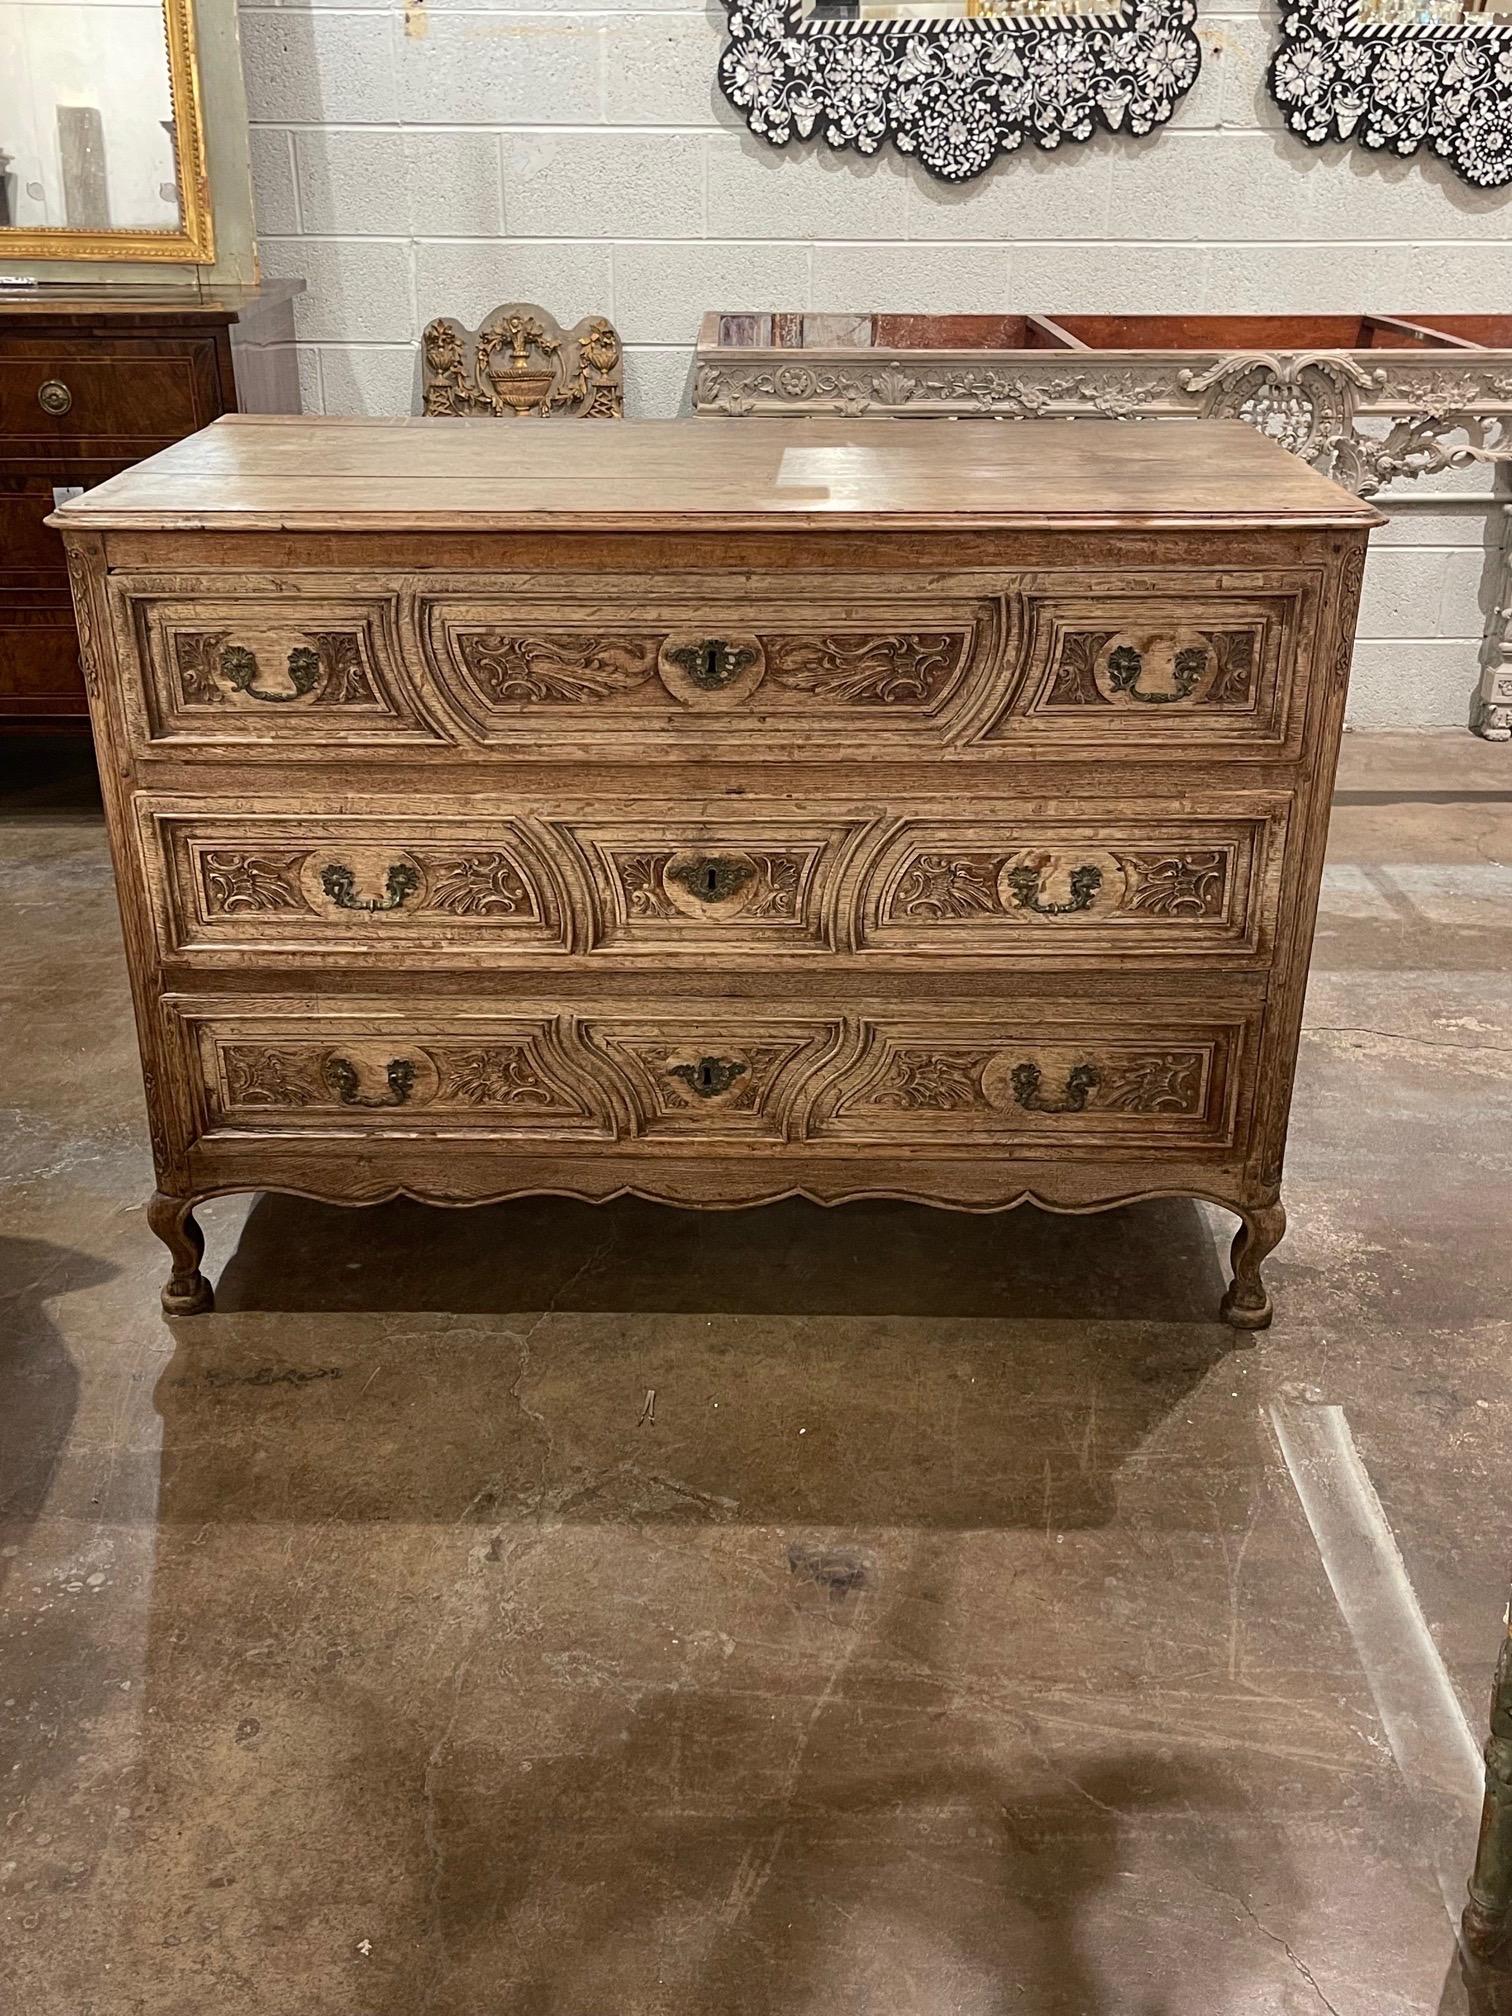 Handsome 18th century French carved and bleached oak commode. Pretty carvings and lovely patina! A very special piece!